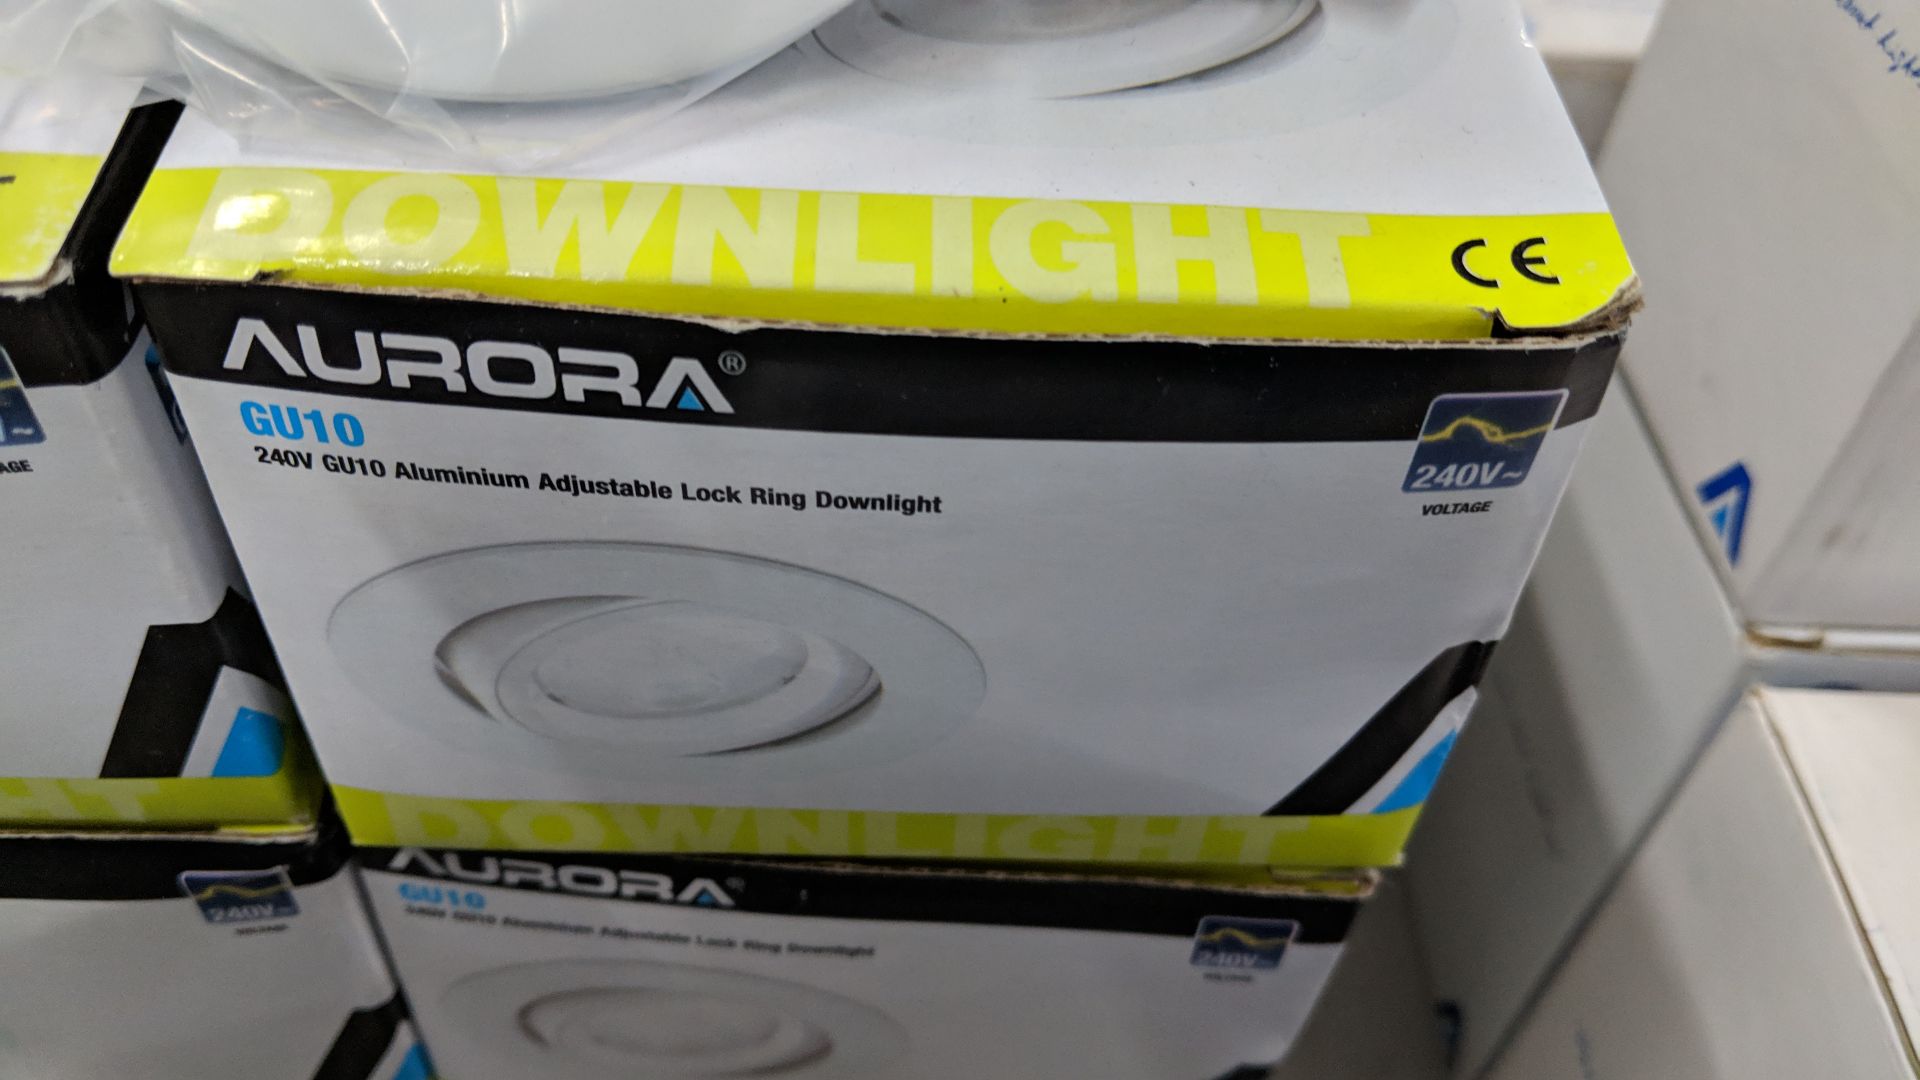 13 off Aurora GU10 240V aluminium adjustable lock ring downlights This lot is one of a number of - Image 3 of 3